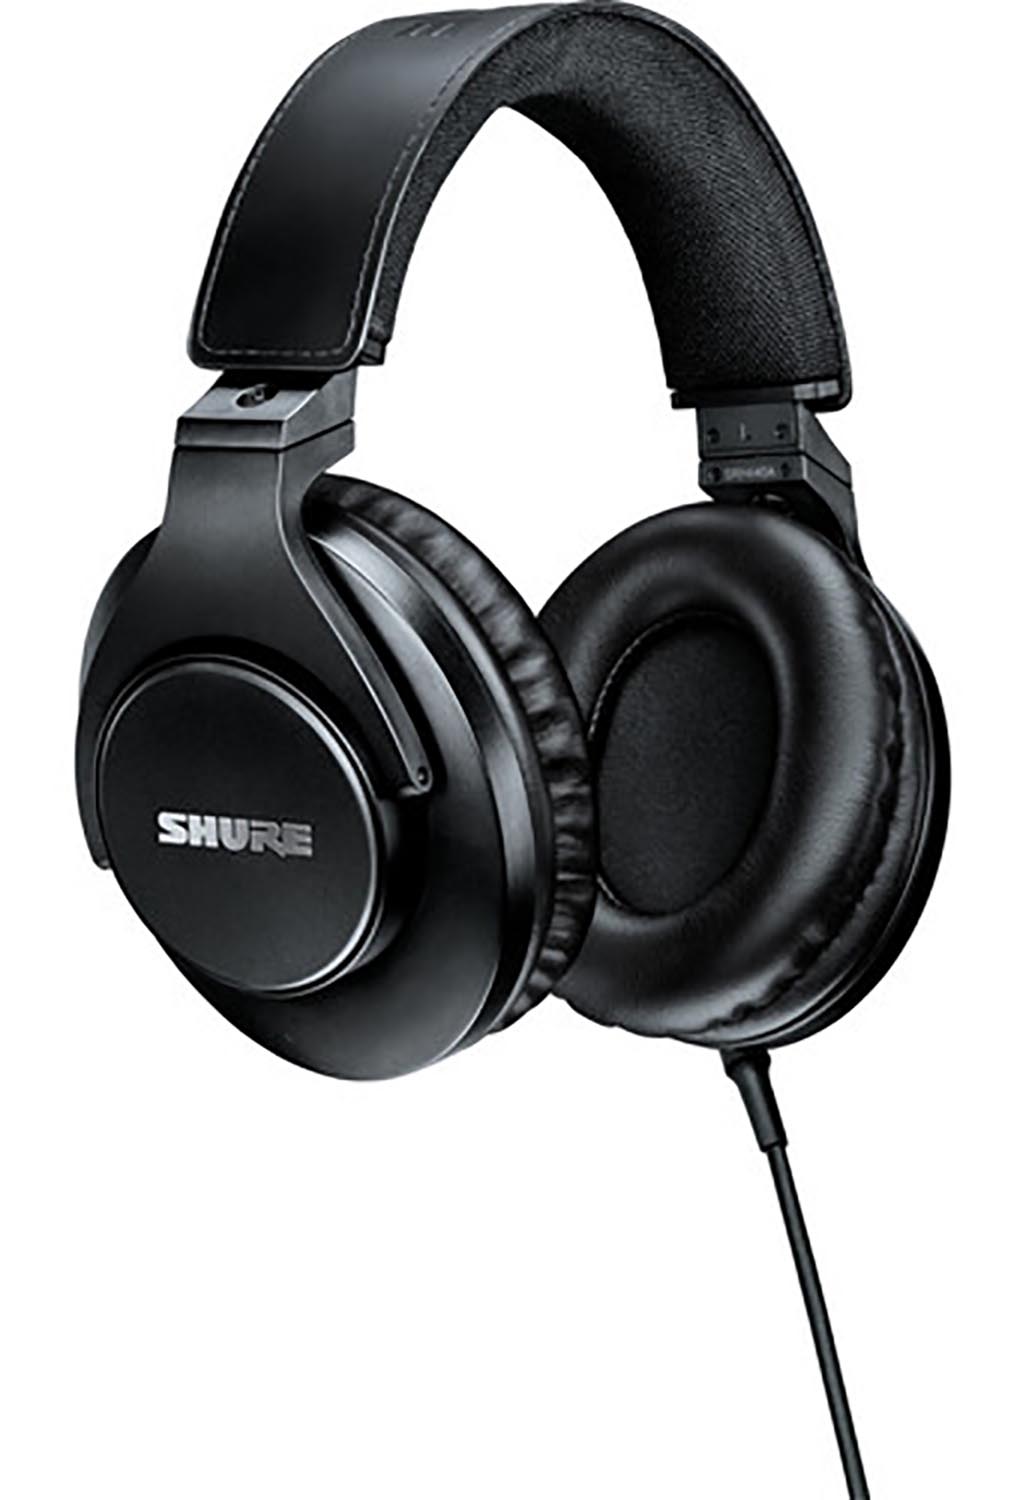 Shure Podcast Package with SRH440A Studio Headphones and MV7-K USB Podcast Microphone - Hollywood DJ